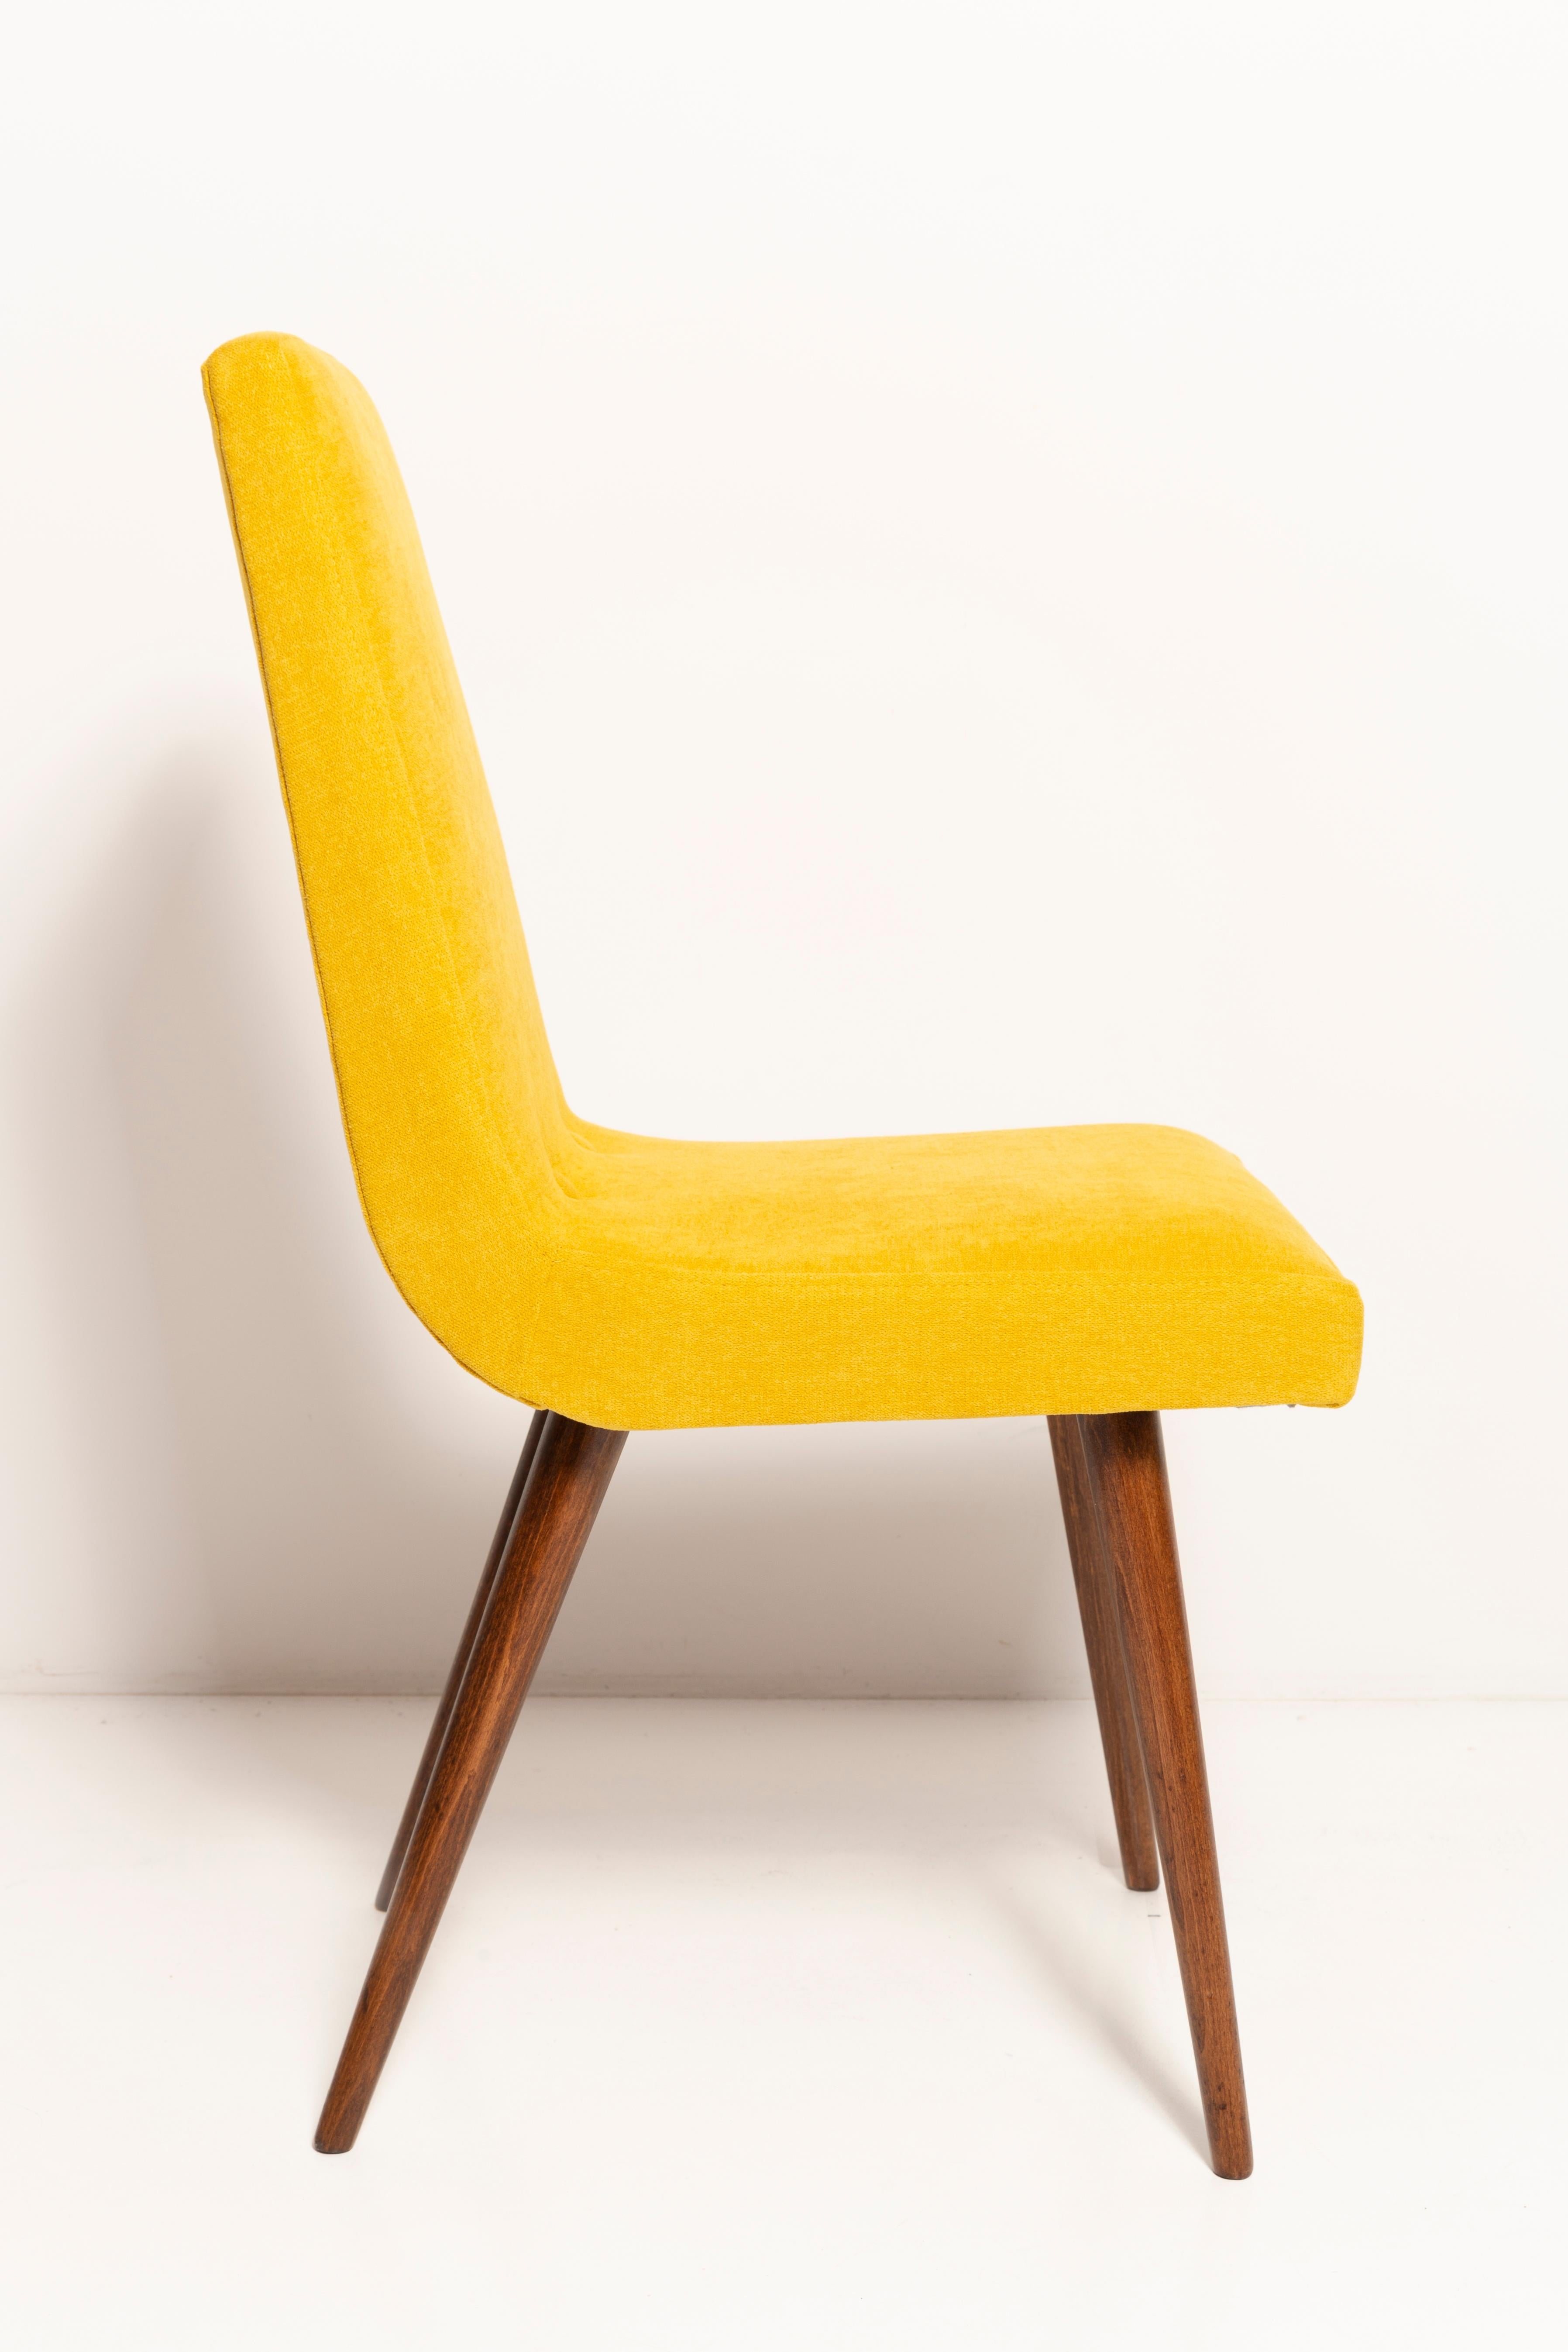 Hand-Crafted Six 20th Century Mustard Yellow Wool Chair, Rajmund Halas Europe, 1960s For Sale